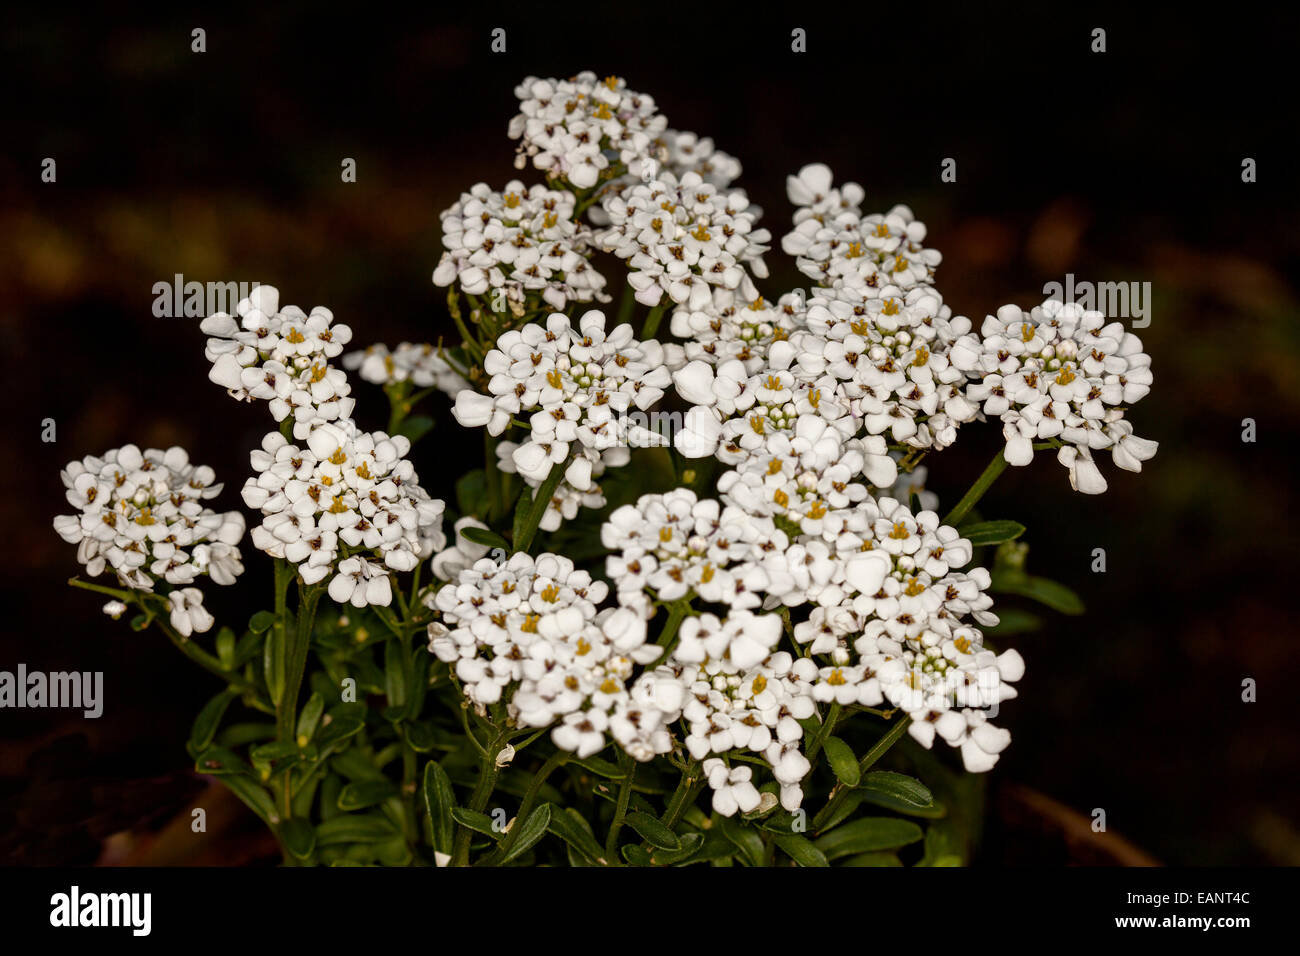 Cluster of white flowers and dark green leaves of Iberis sempervirens, perennial candytuft, against dark background Stock Photo